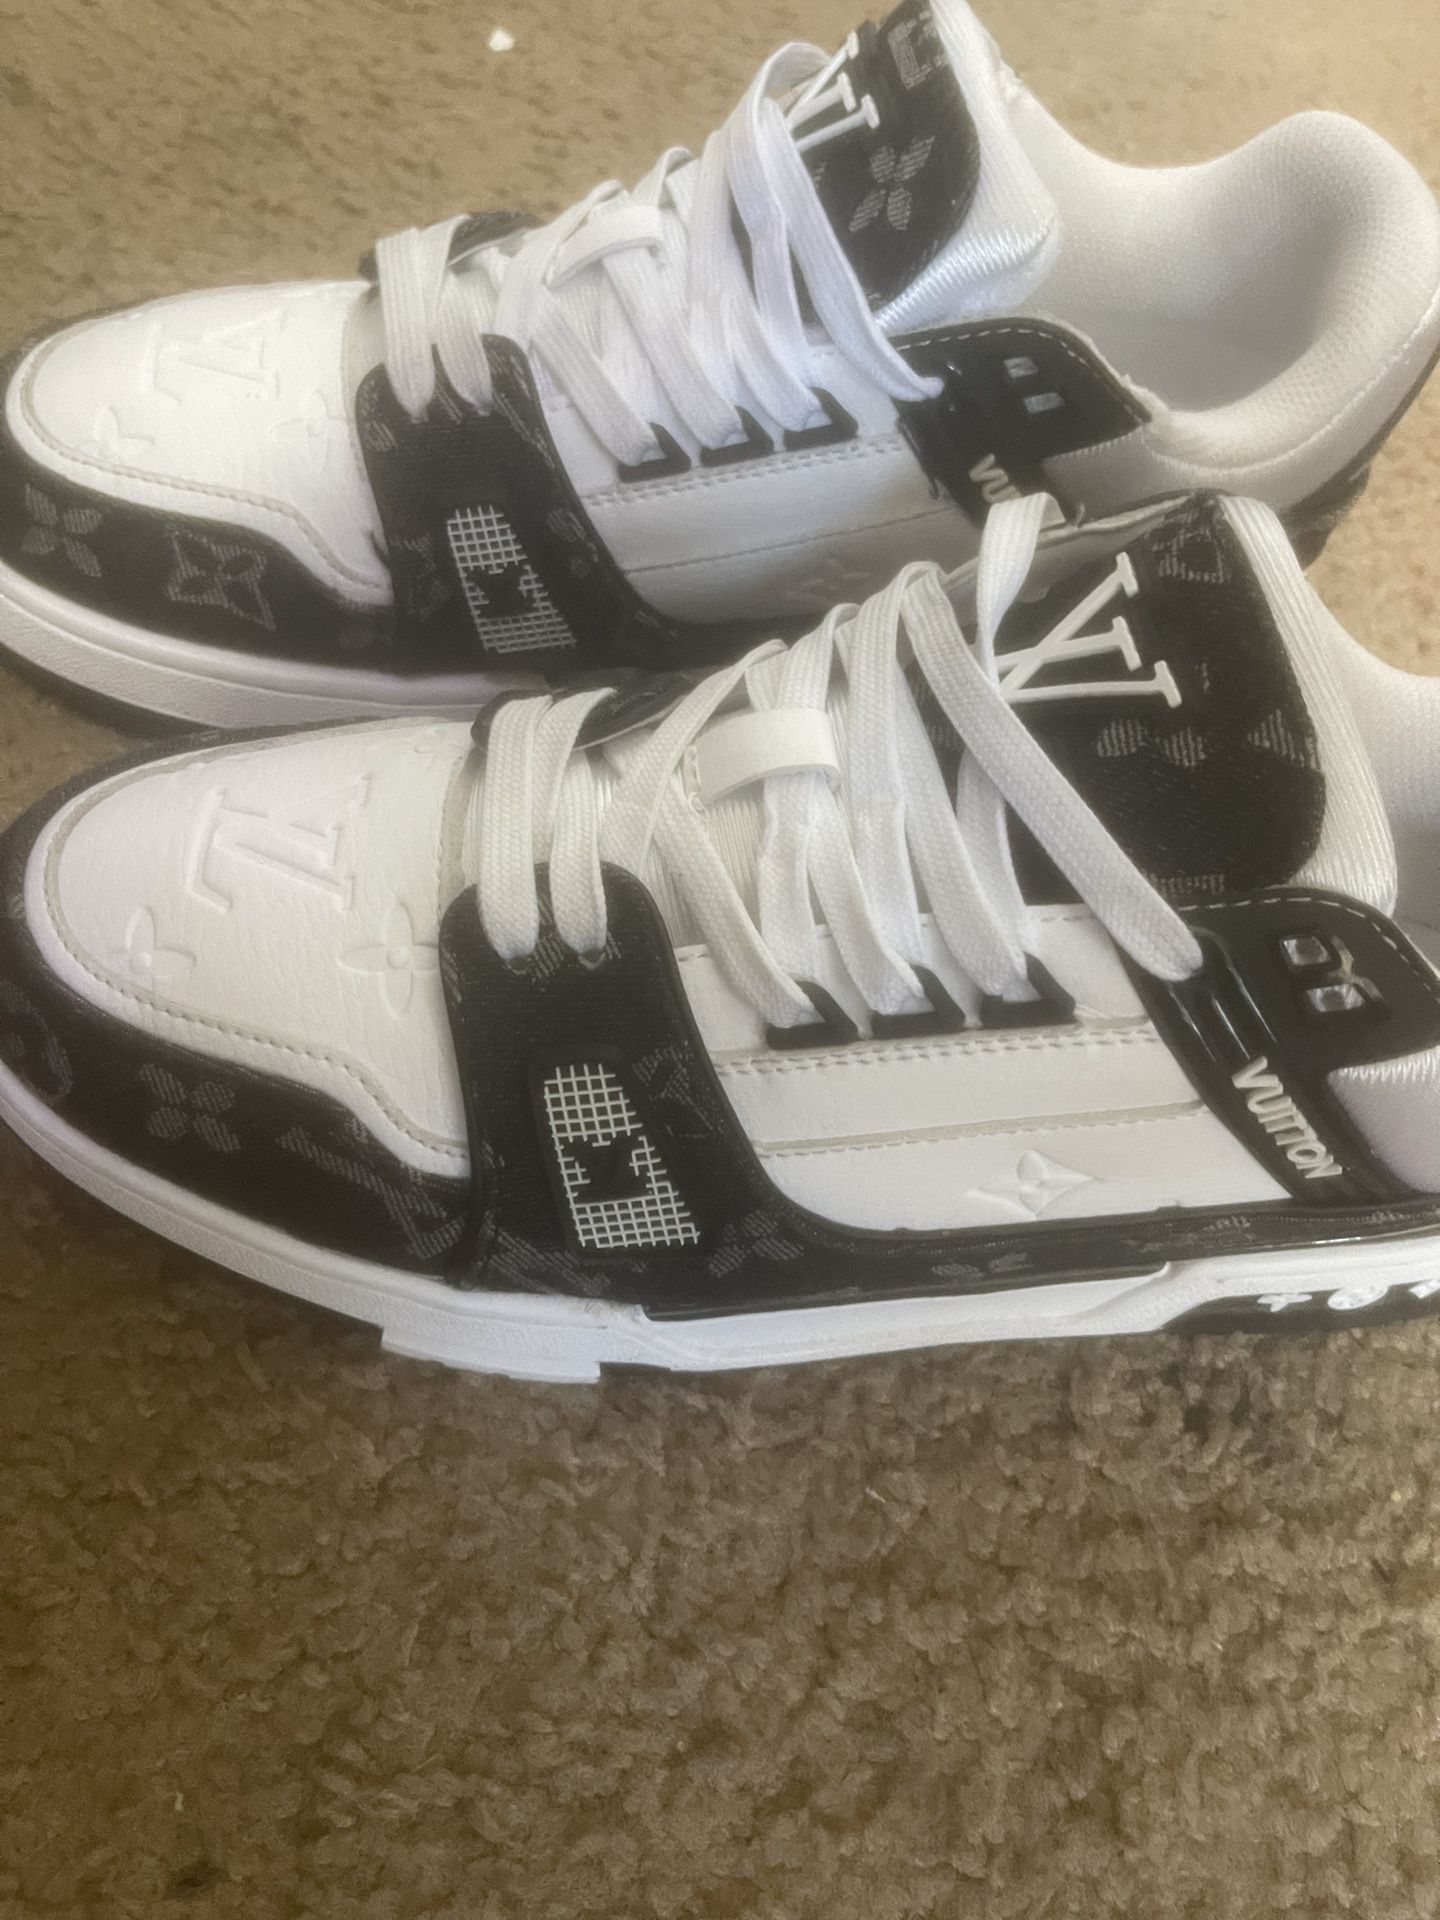 louis vuitton trainers size 11.5 or 45 for Sale in Queens, NY